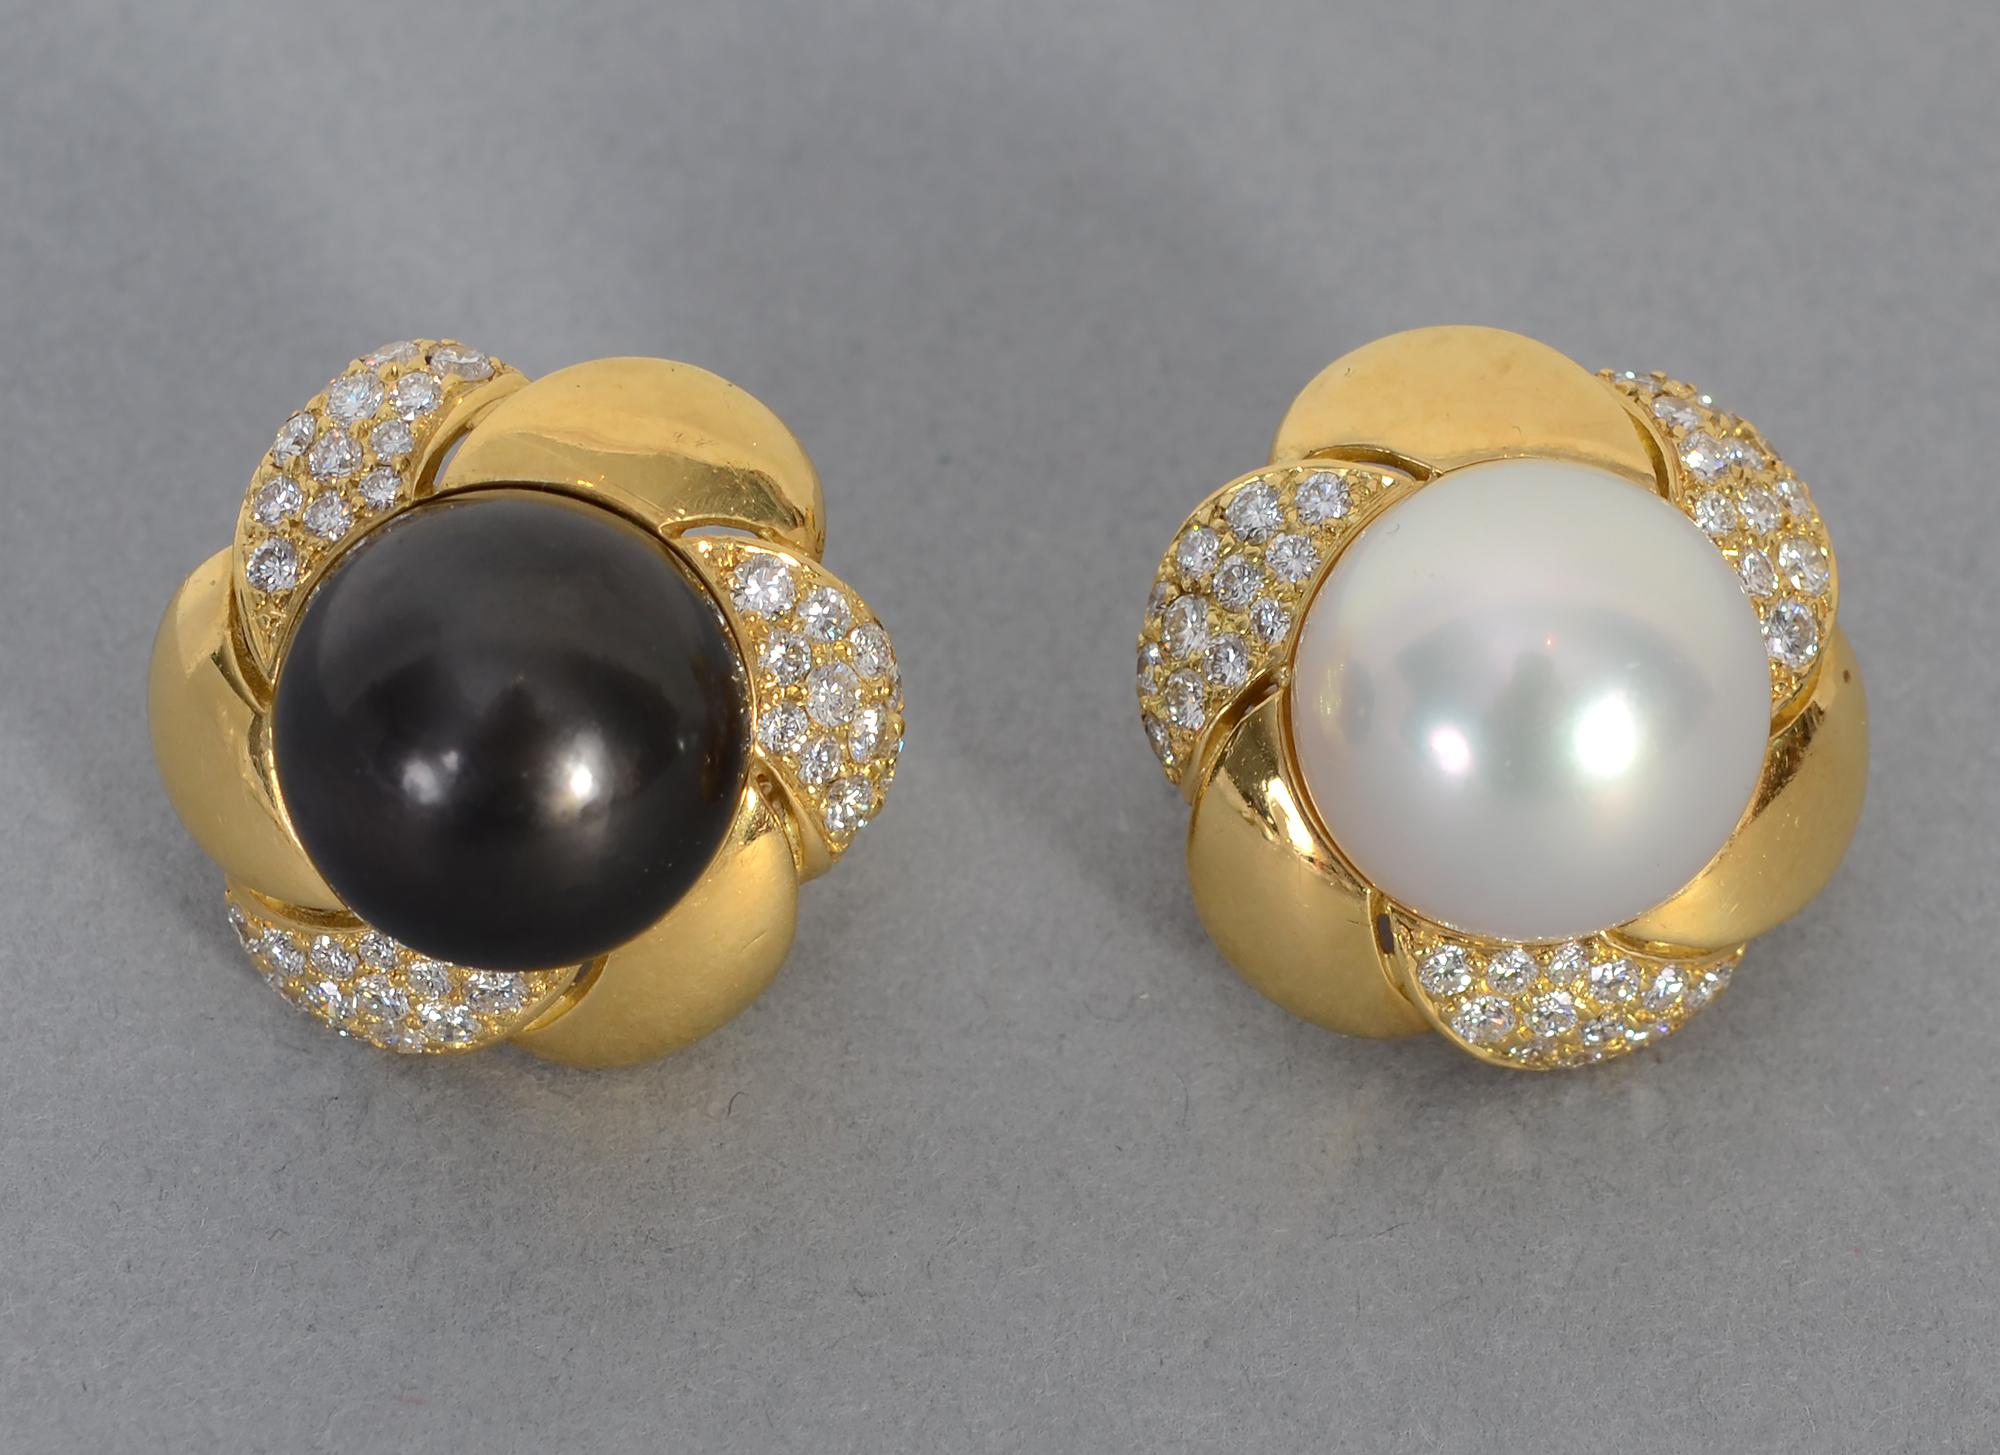 Striking huge black and white pearl earrings surrounded by diamonds. The pearls are each 15 mm. There are 72 round brilliant diamonds with a total weight of approximately 3 carats. Lobed gold plaques alternate with those of diamonds. The combination